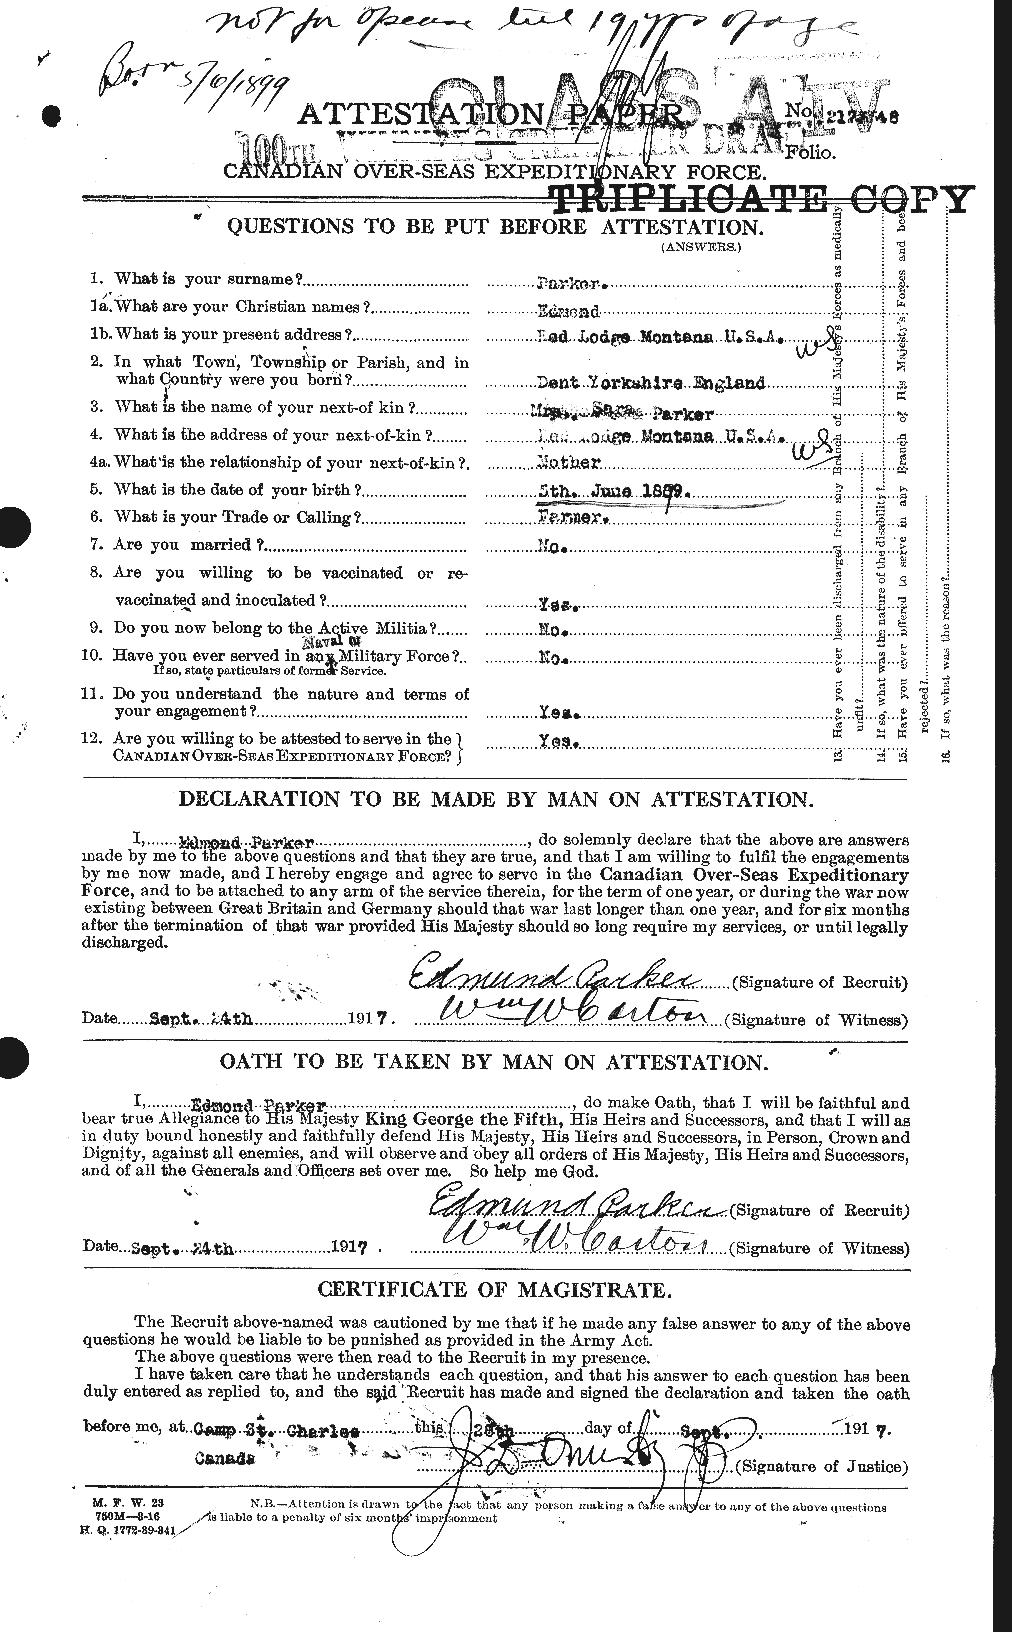 Personnel Records of the First World War - CEF 565125a